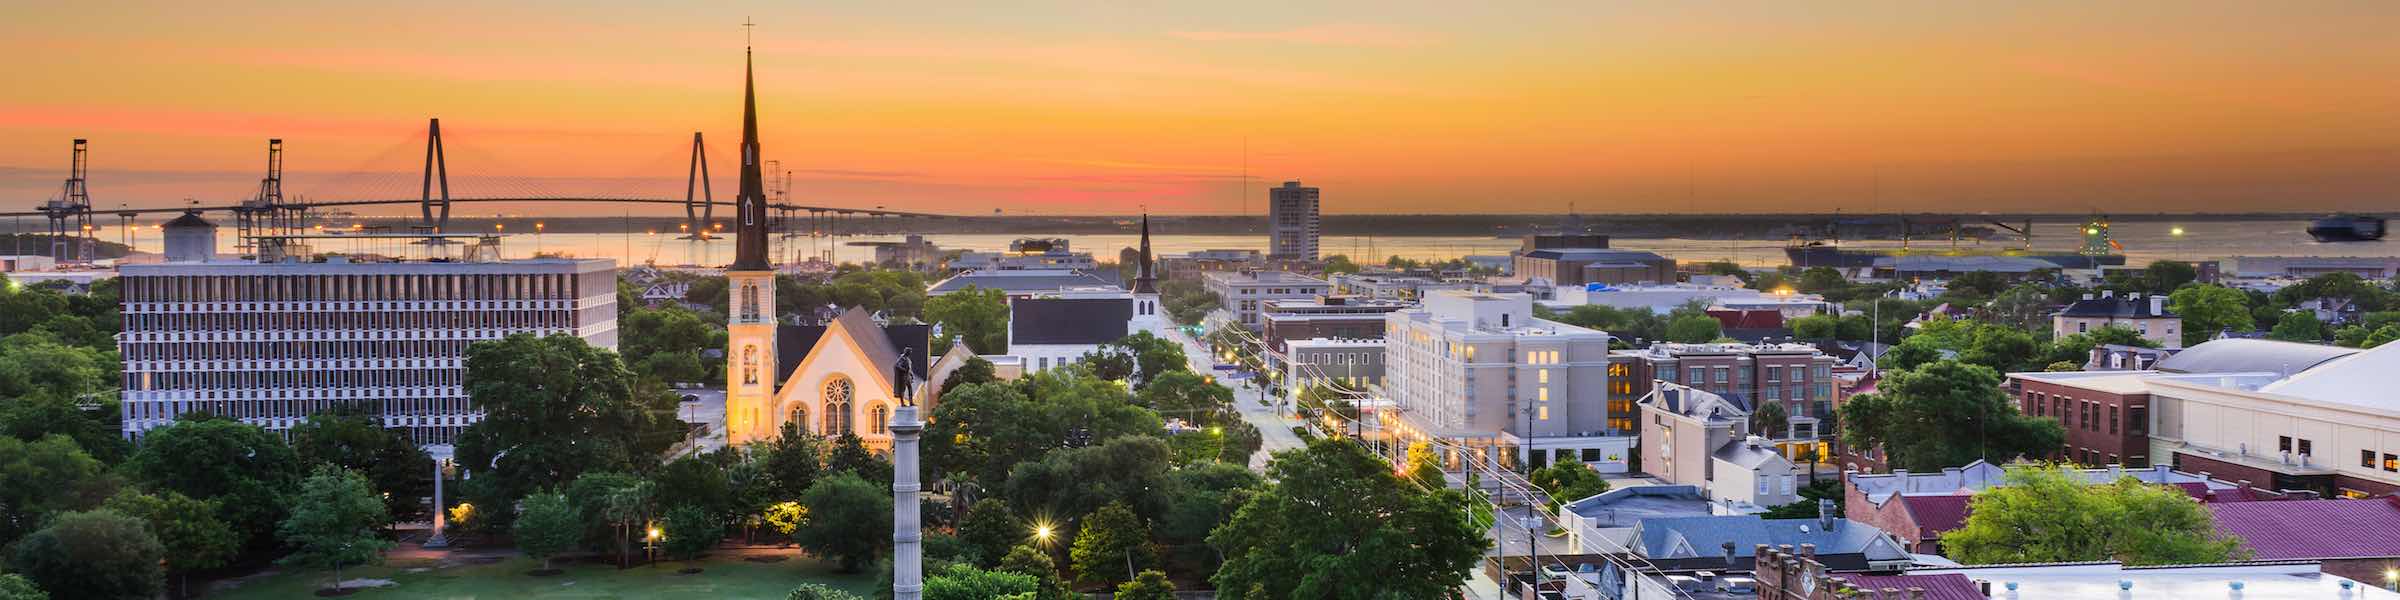 Sunset view of Charleston, SC, looking out over Marion Square toward the river.